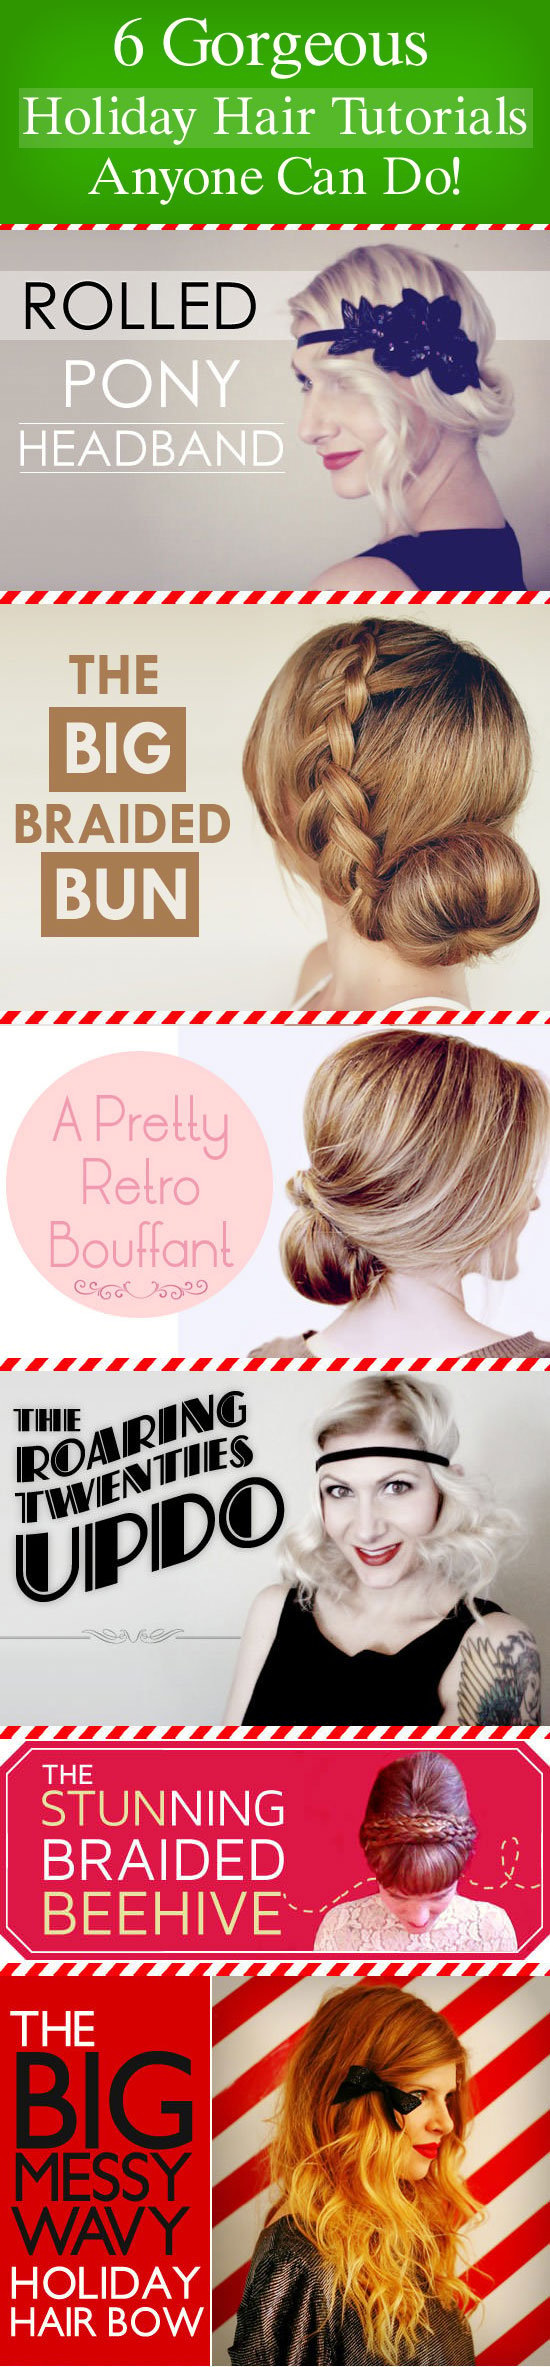 holiday hairstyle tutorials